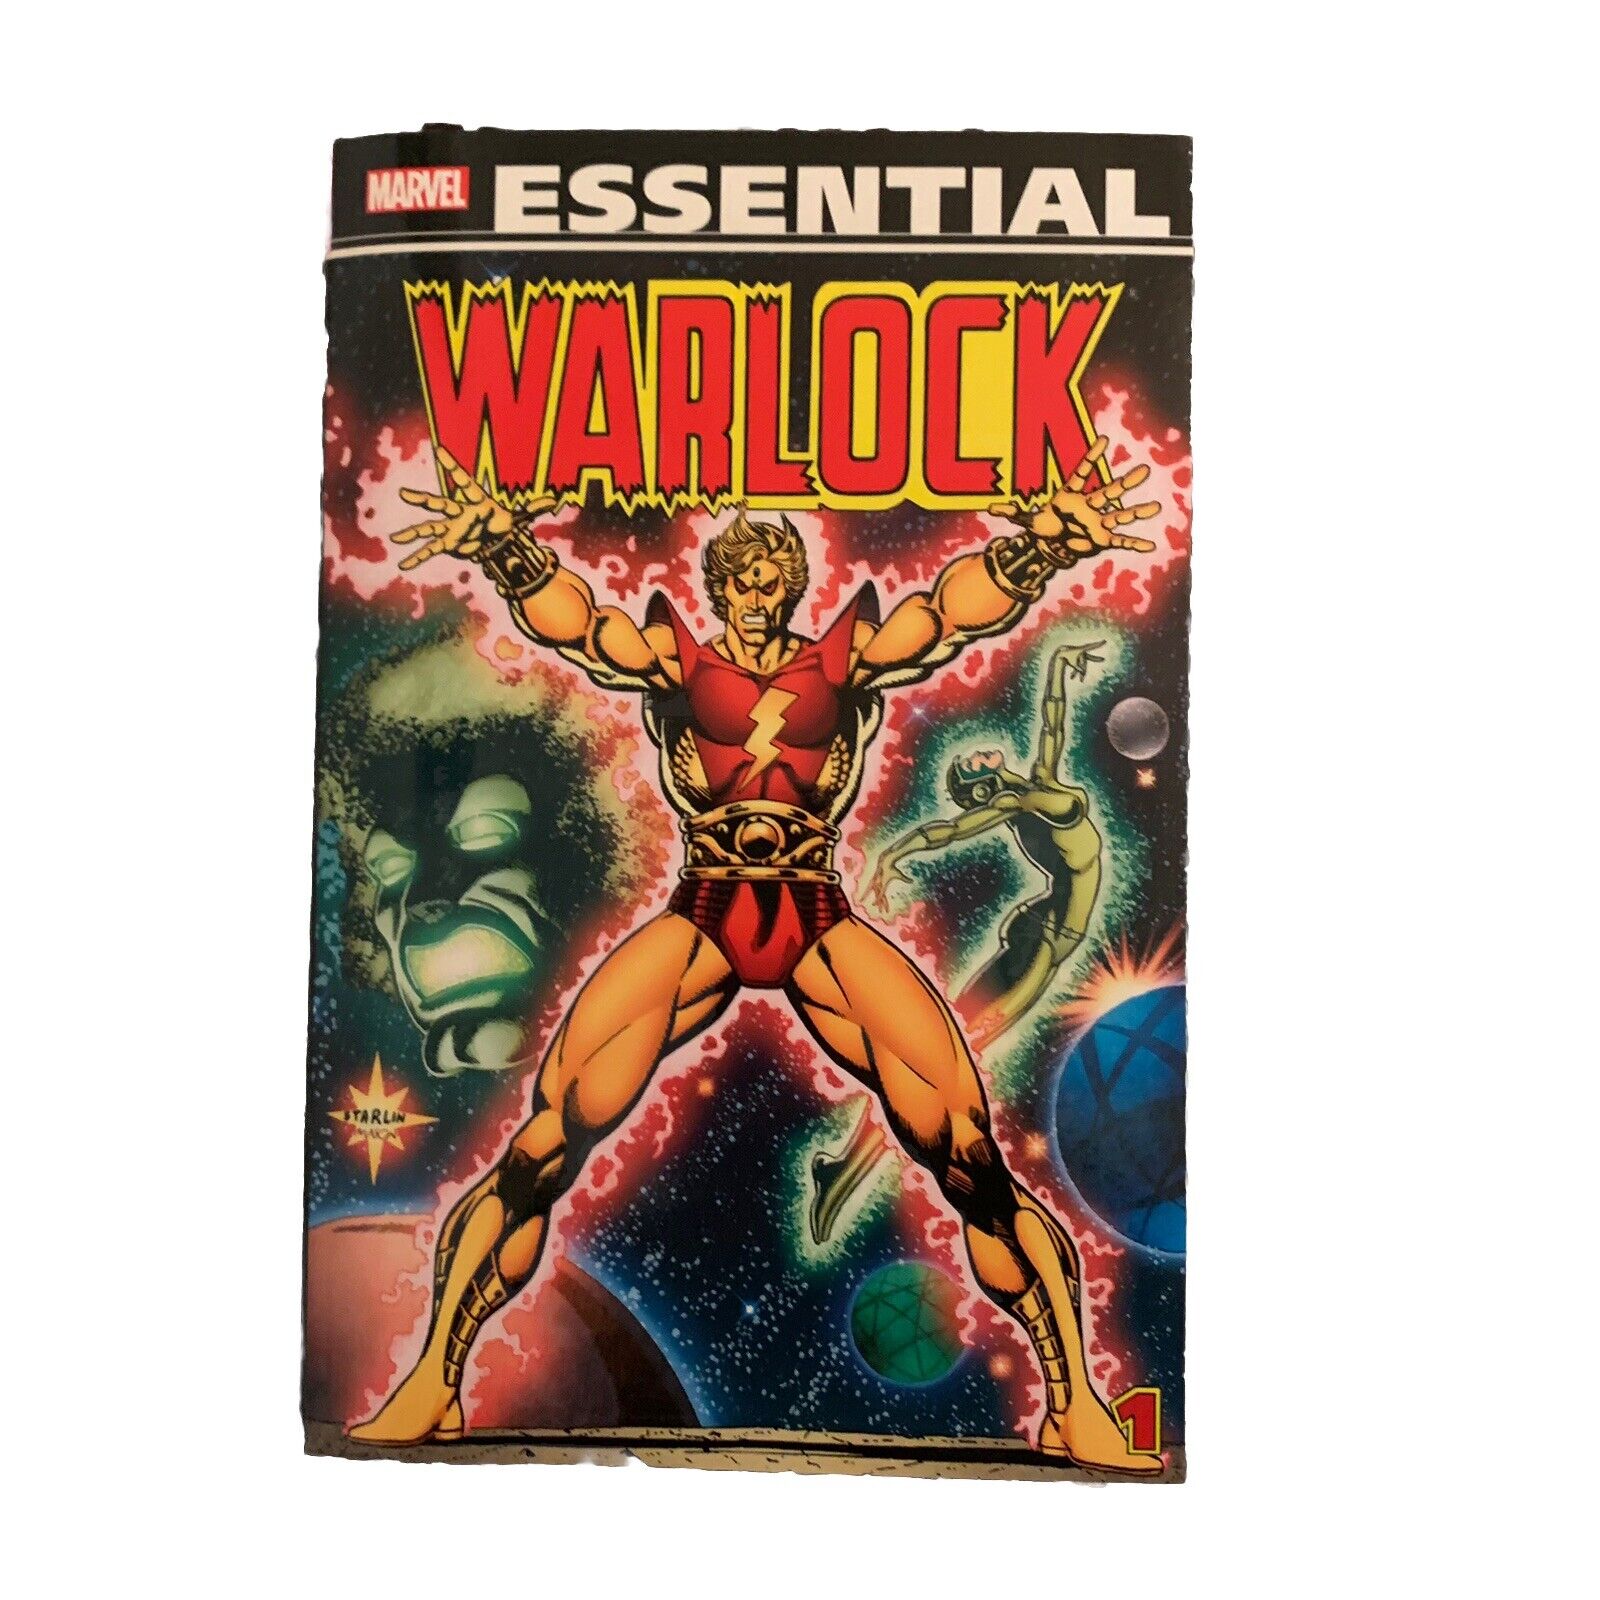 Essential Warlock by Chris Claremont and Roy Thomas (2012, Trade Paperback)